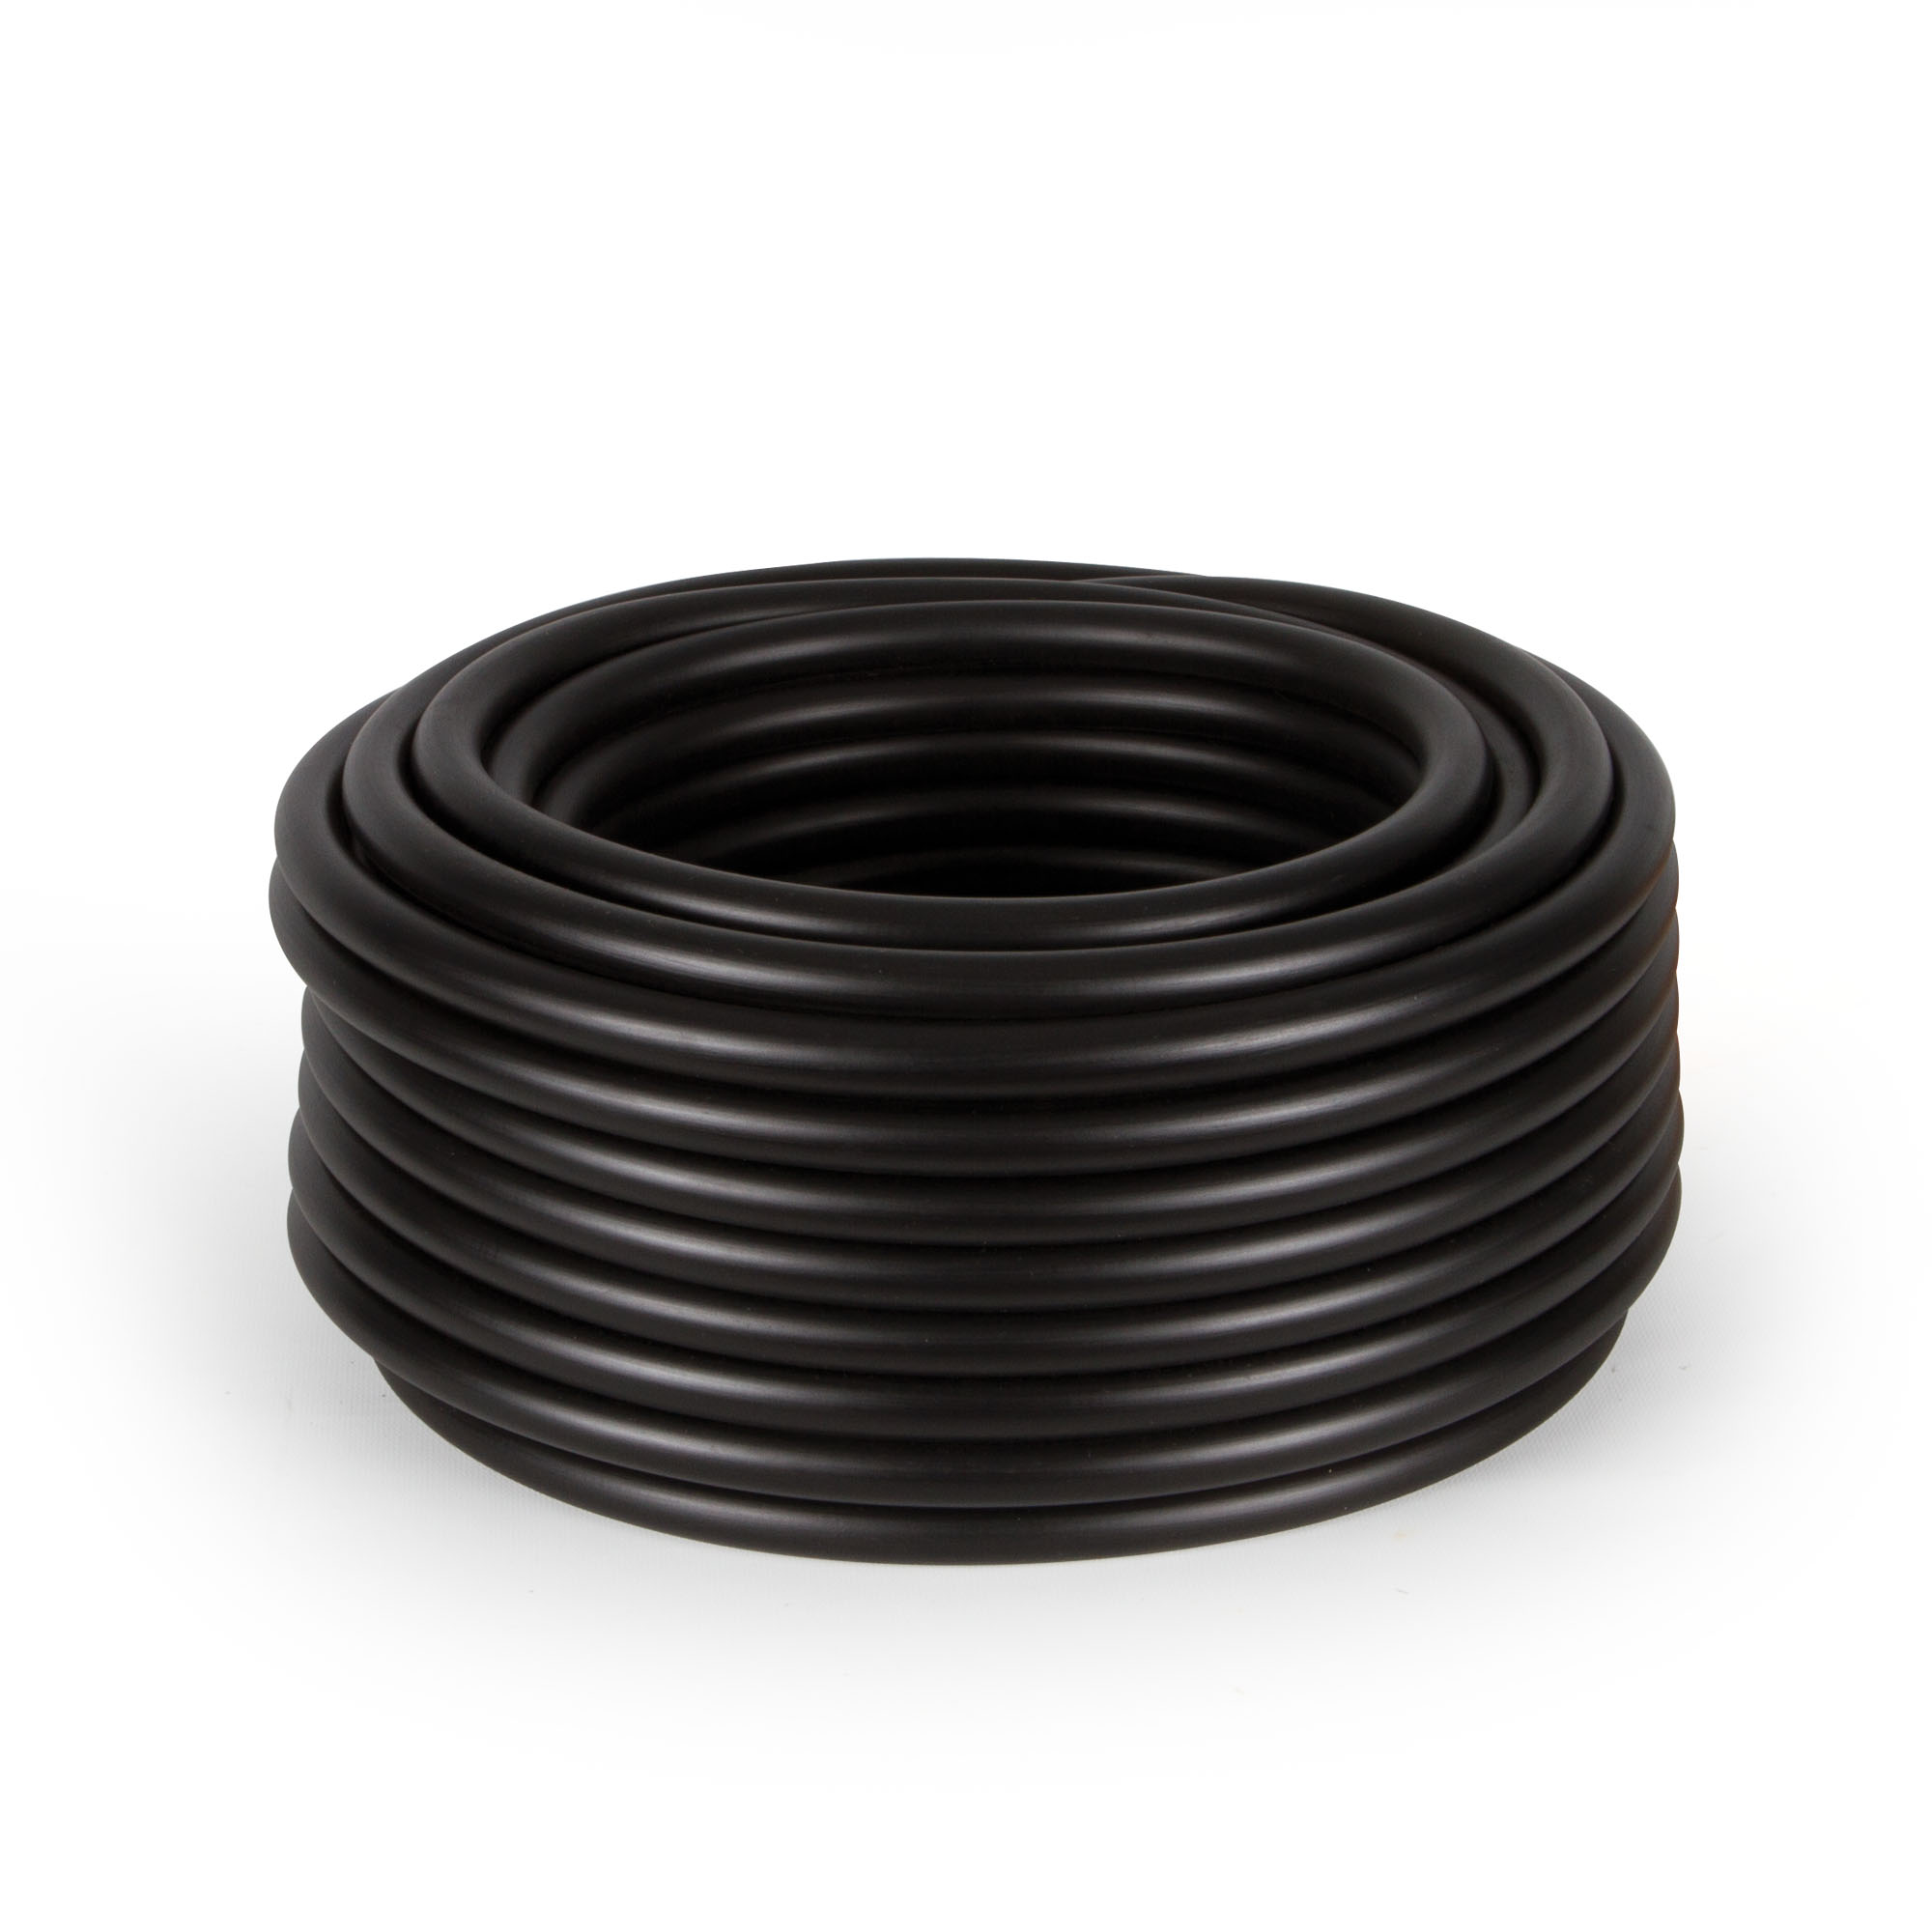 WEIGHTED TUBING - ⅜" @ 500'